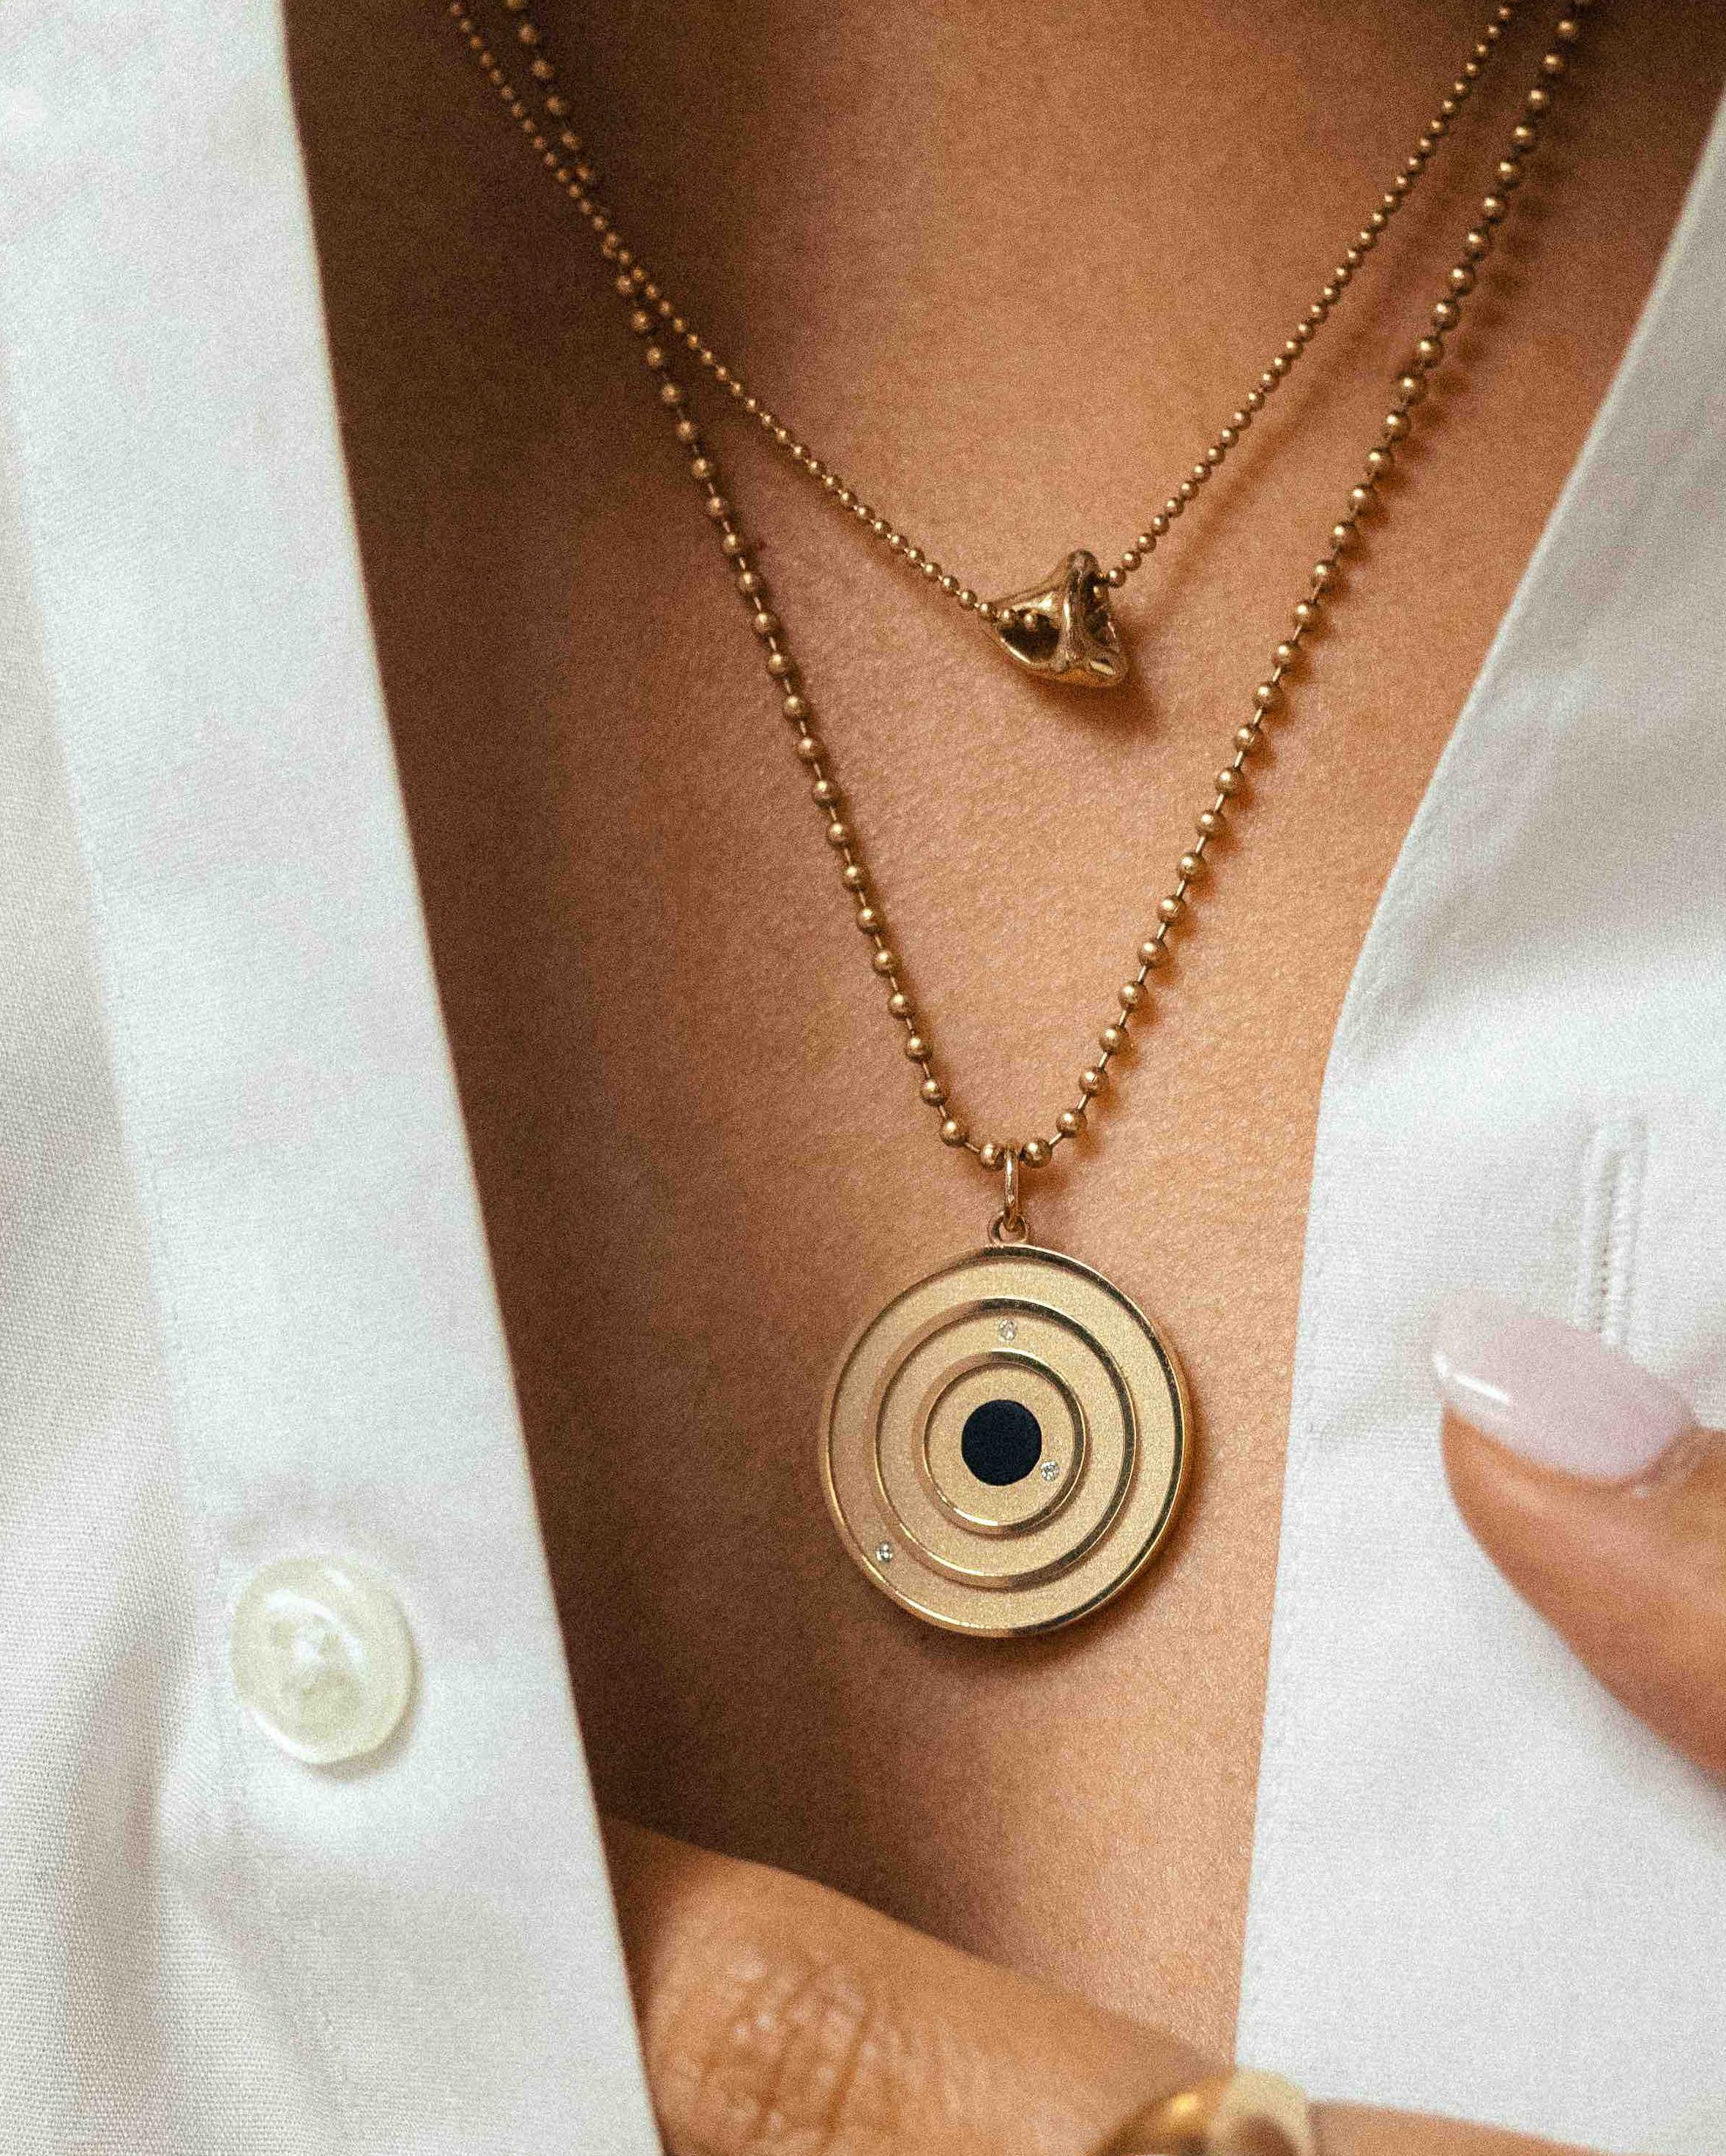 The Cosmos Pendant– designed and handmade by EMBLM Fine Jewelry

This circular pendant is cast in solid gold, with a sandblast finish beneath the concentric circle design. The external elements of the pendant are then high polished, creating a